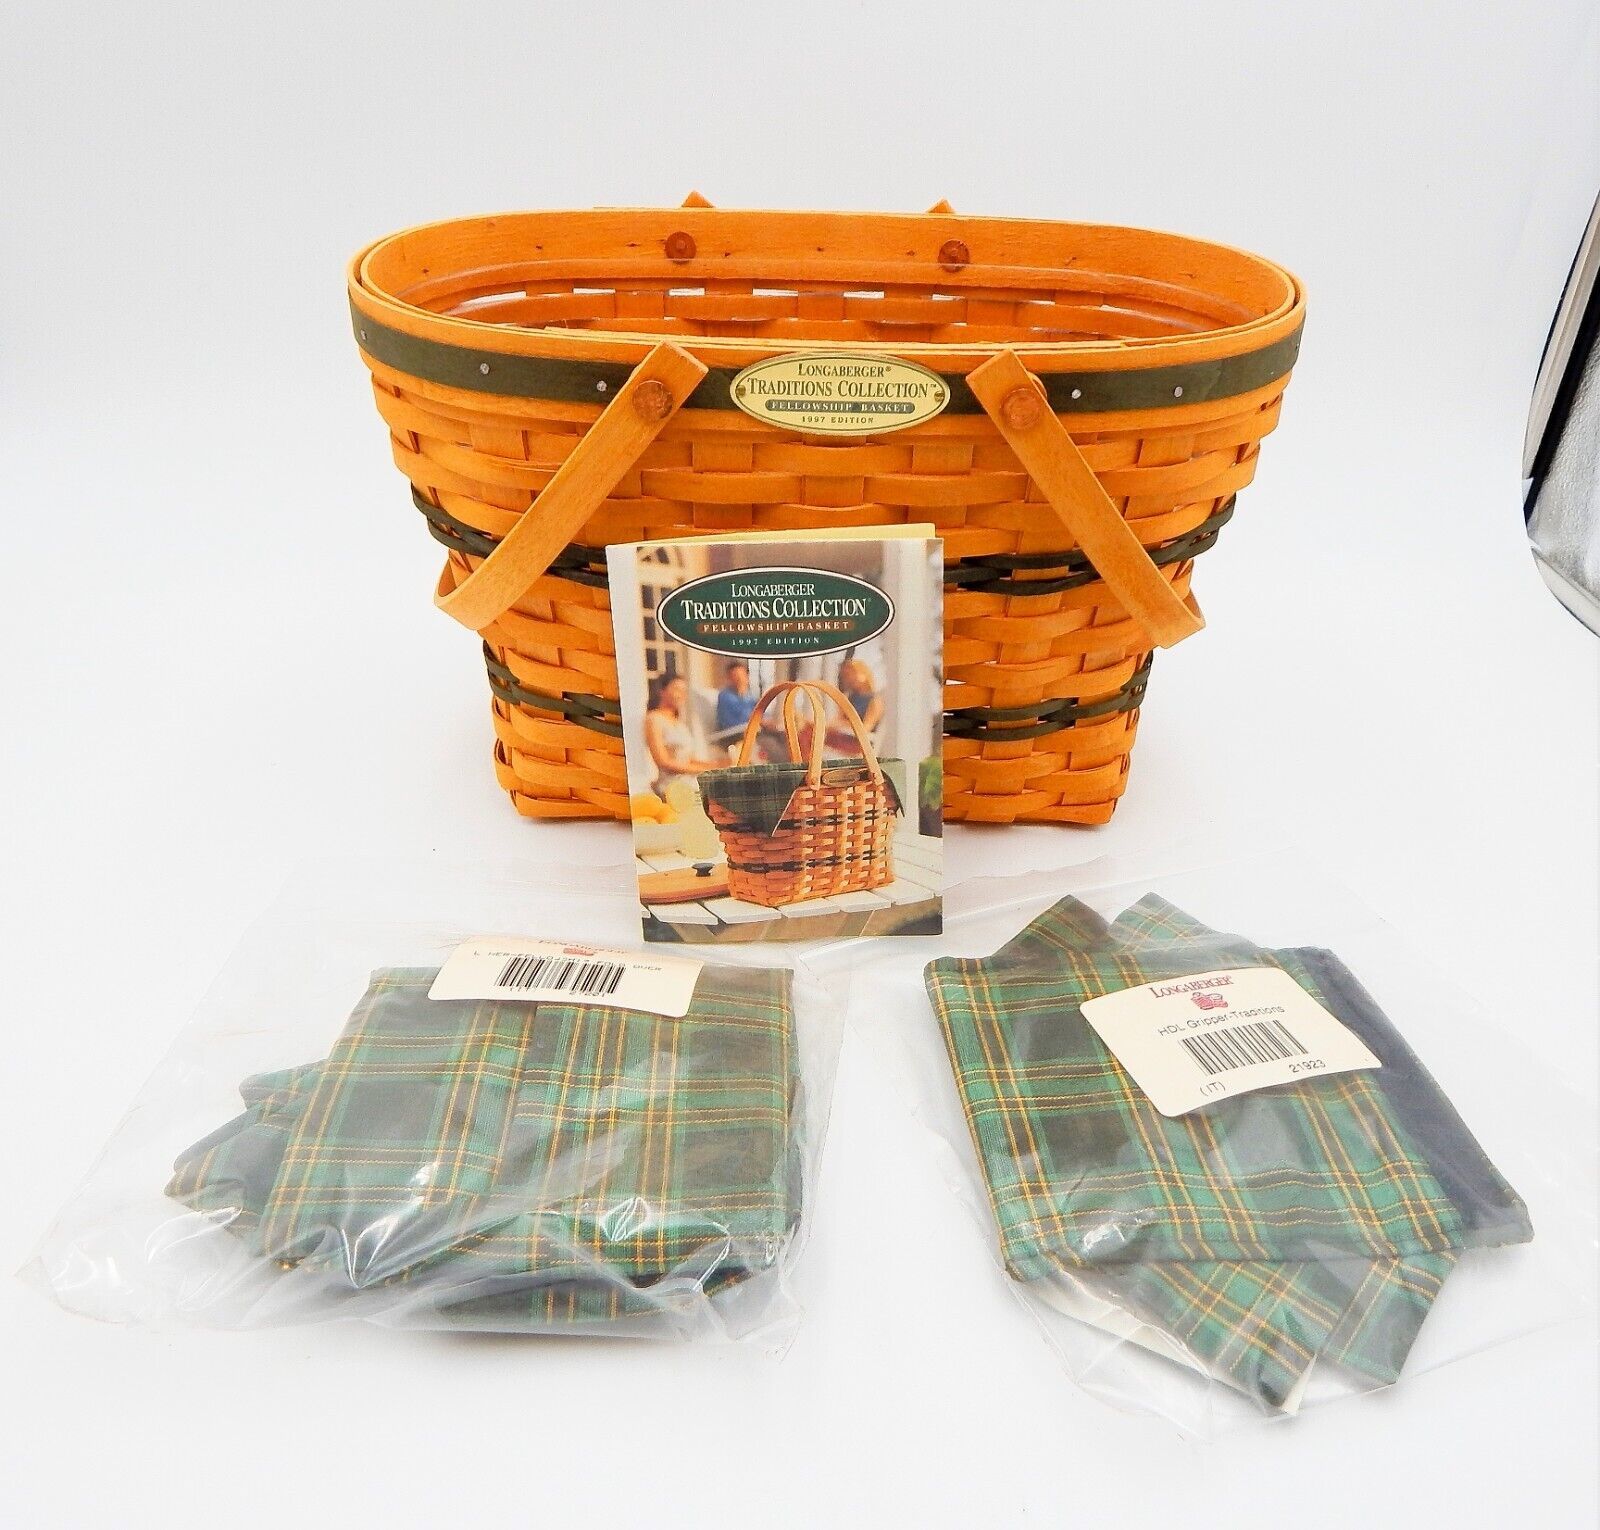 Primary image for Longaberger Traditions 1997 Fellowship Basket Lid Liner Protector Handle Gripper